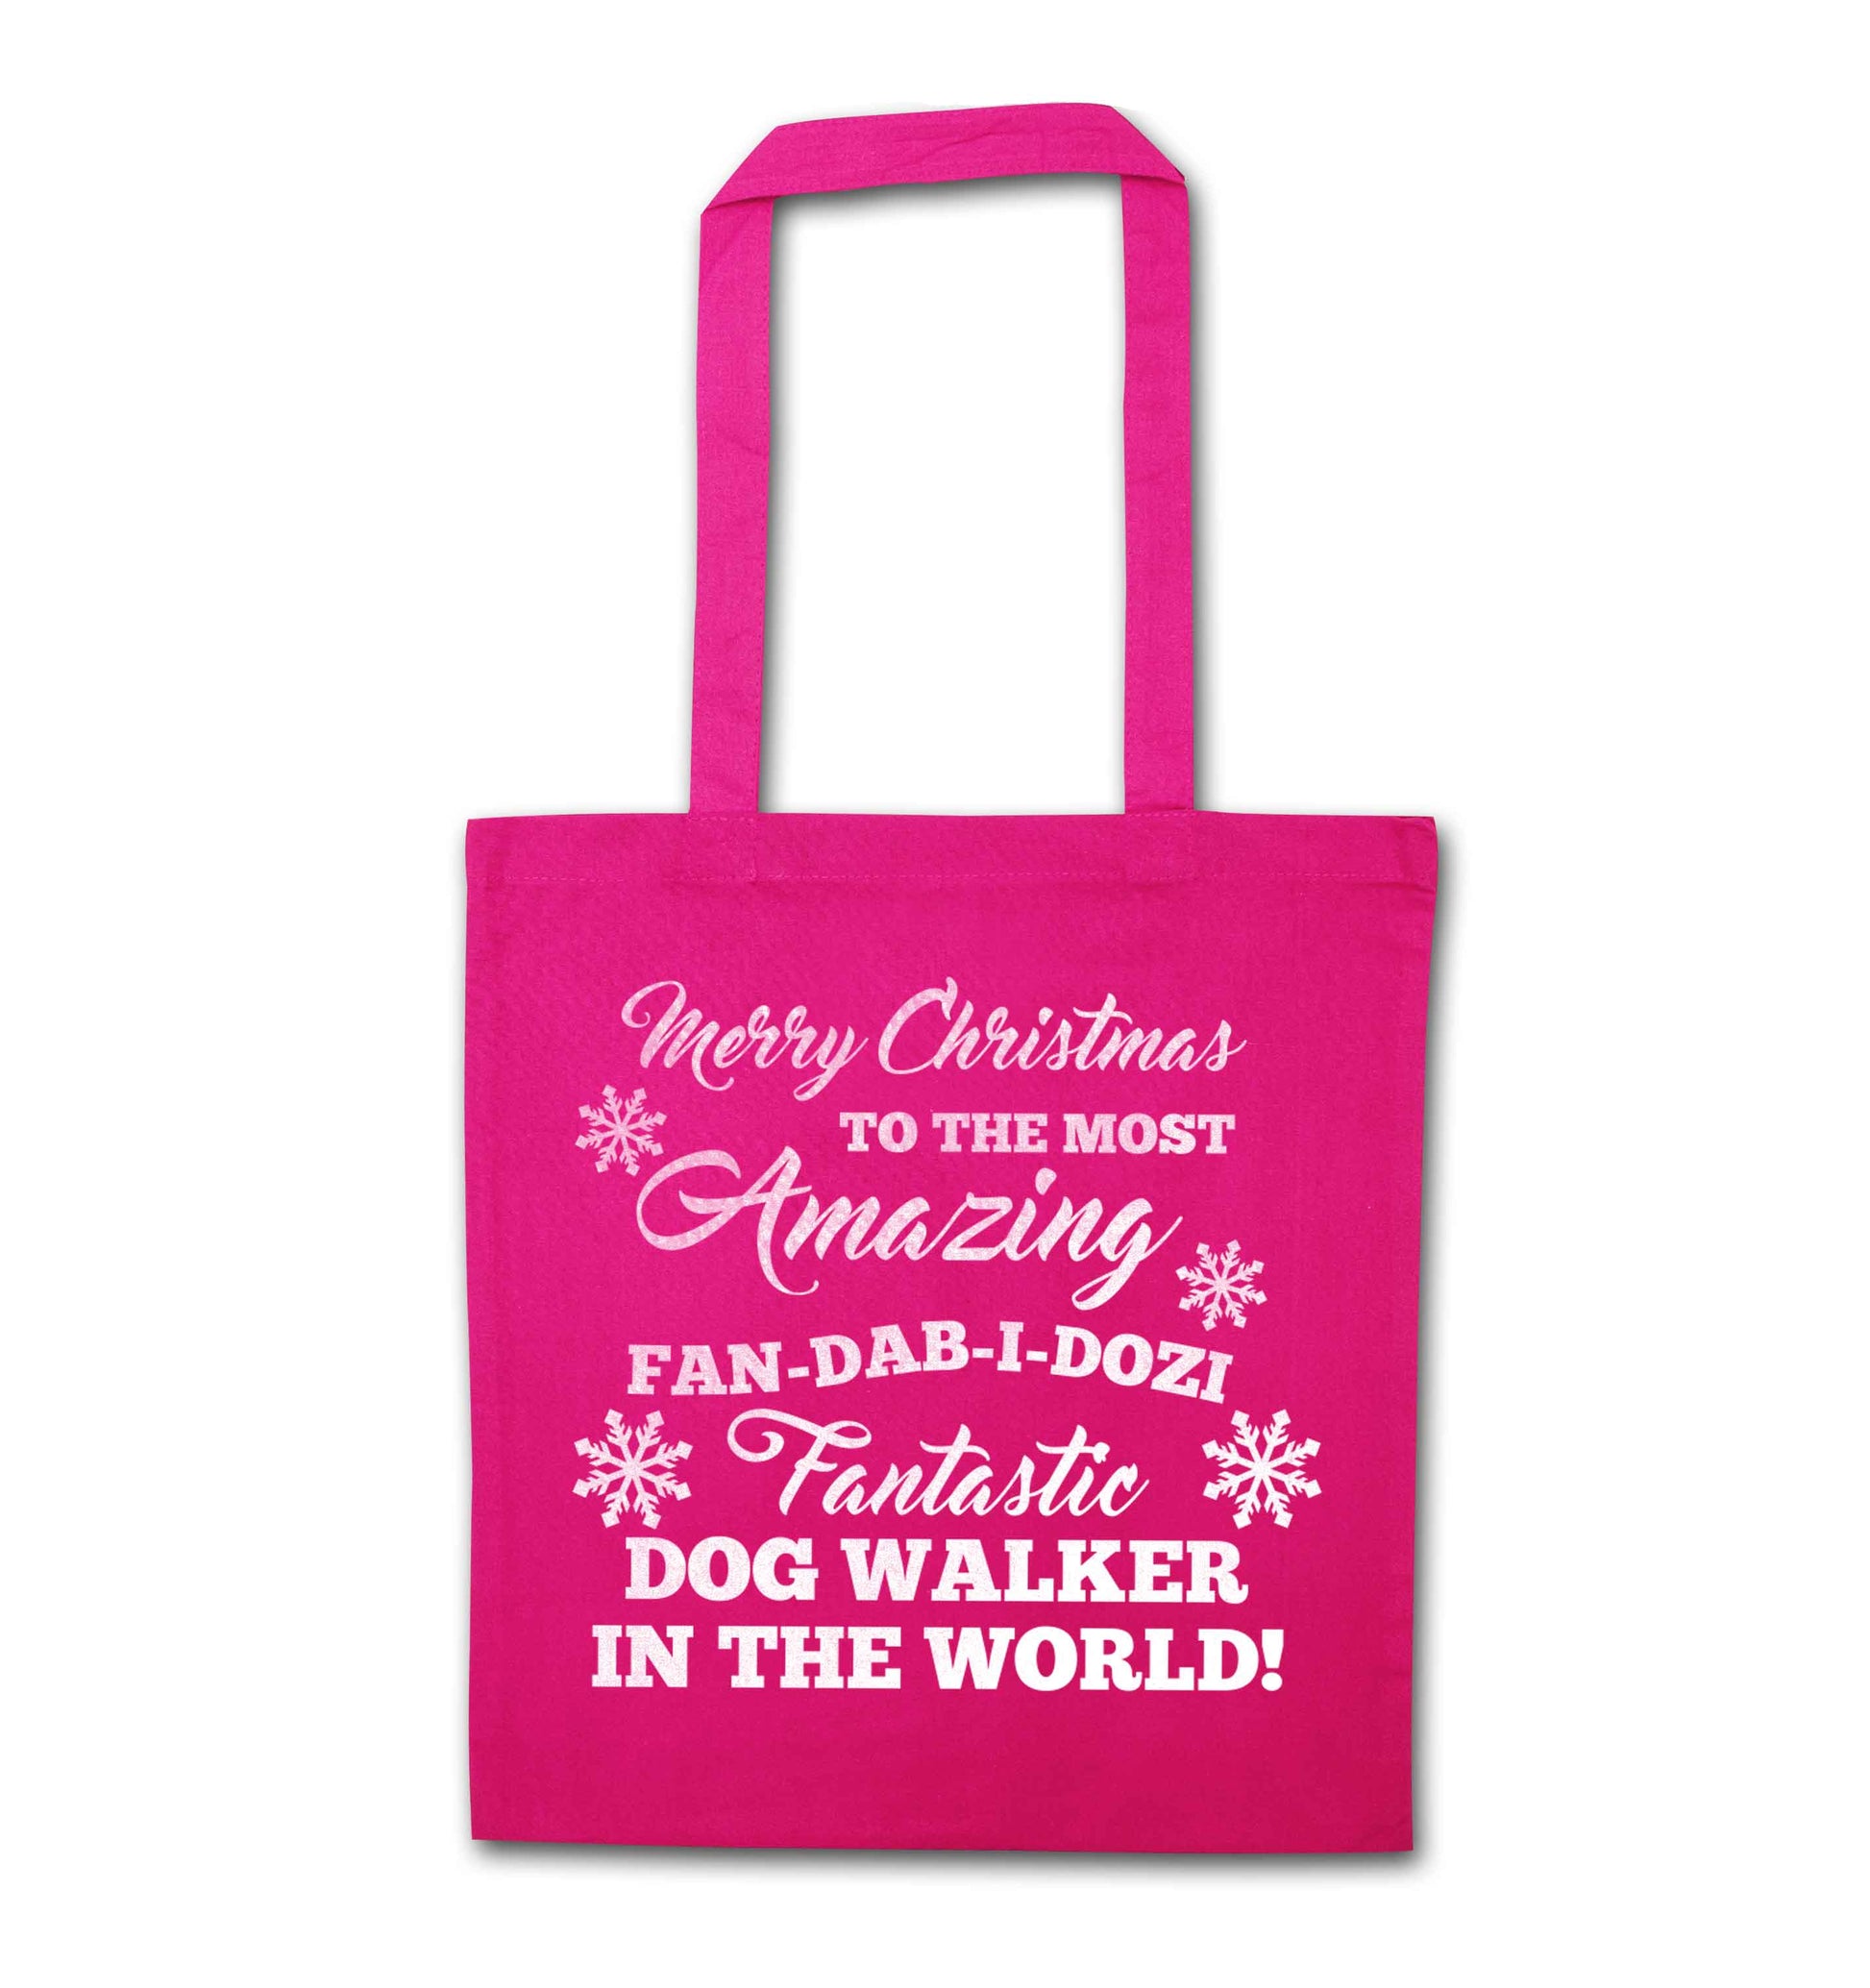 Merry Christmas to the most amazing fan-dab-i-dozi fantasic dog walker in the world pink tote bag